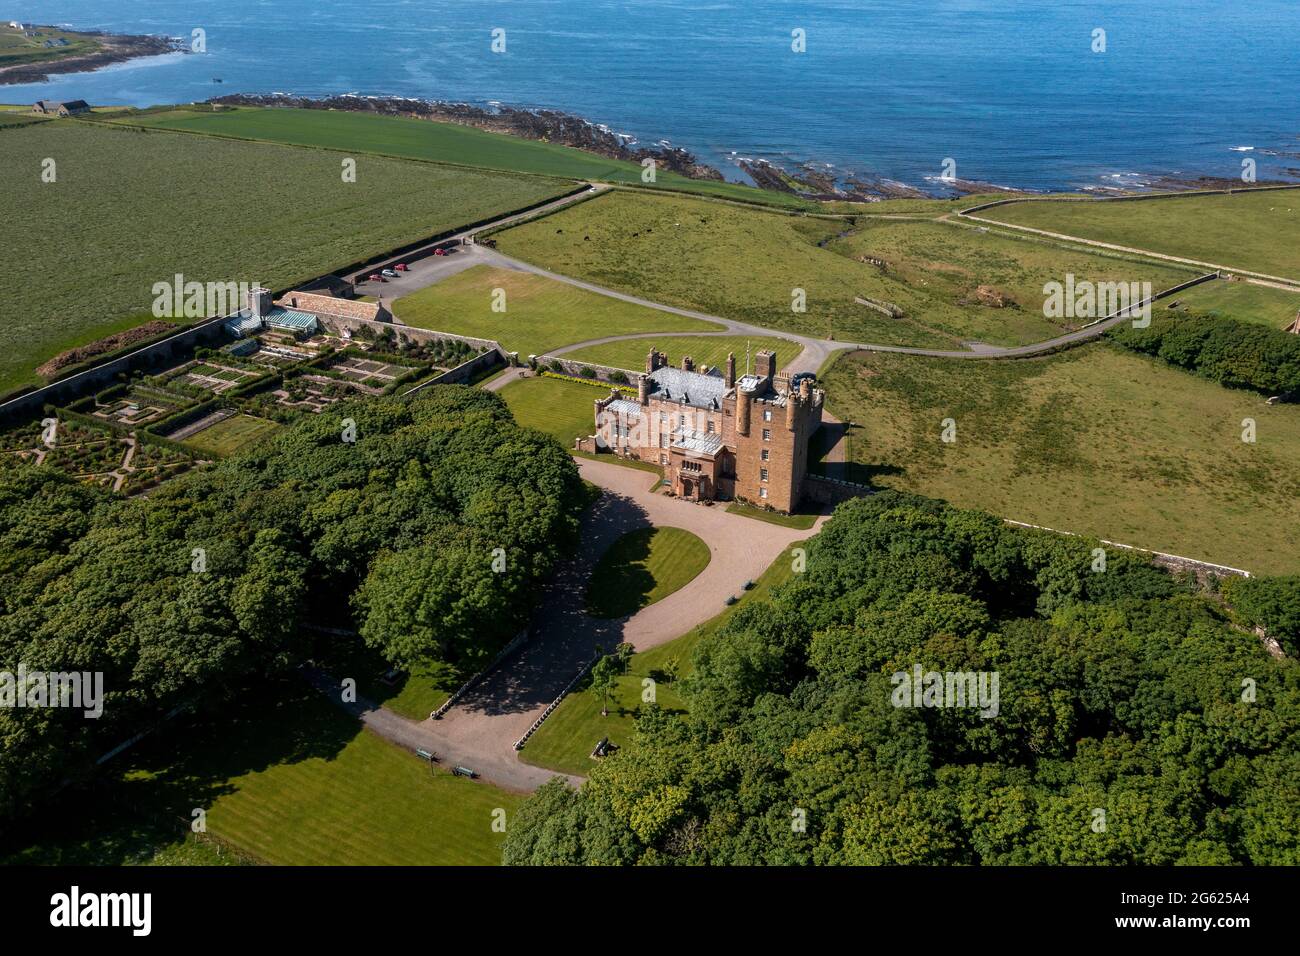 Aerial view of the Castle of Mey and gardens, the former home of the Queen Mother, overlooking the Pentland Firth, Caithness, Scotland. Stock Photo